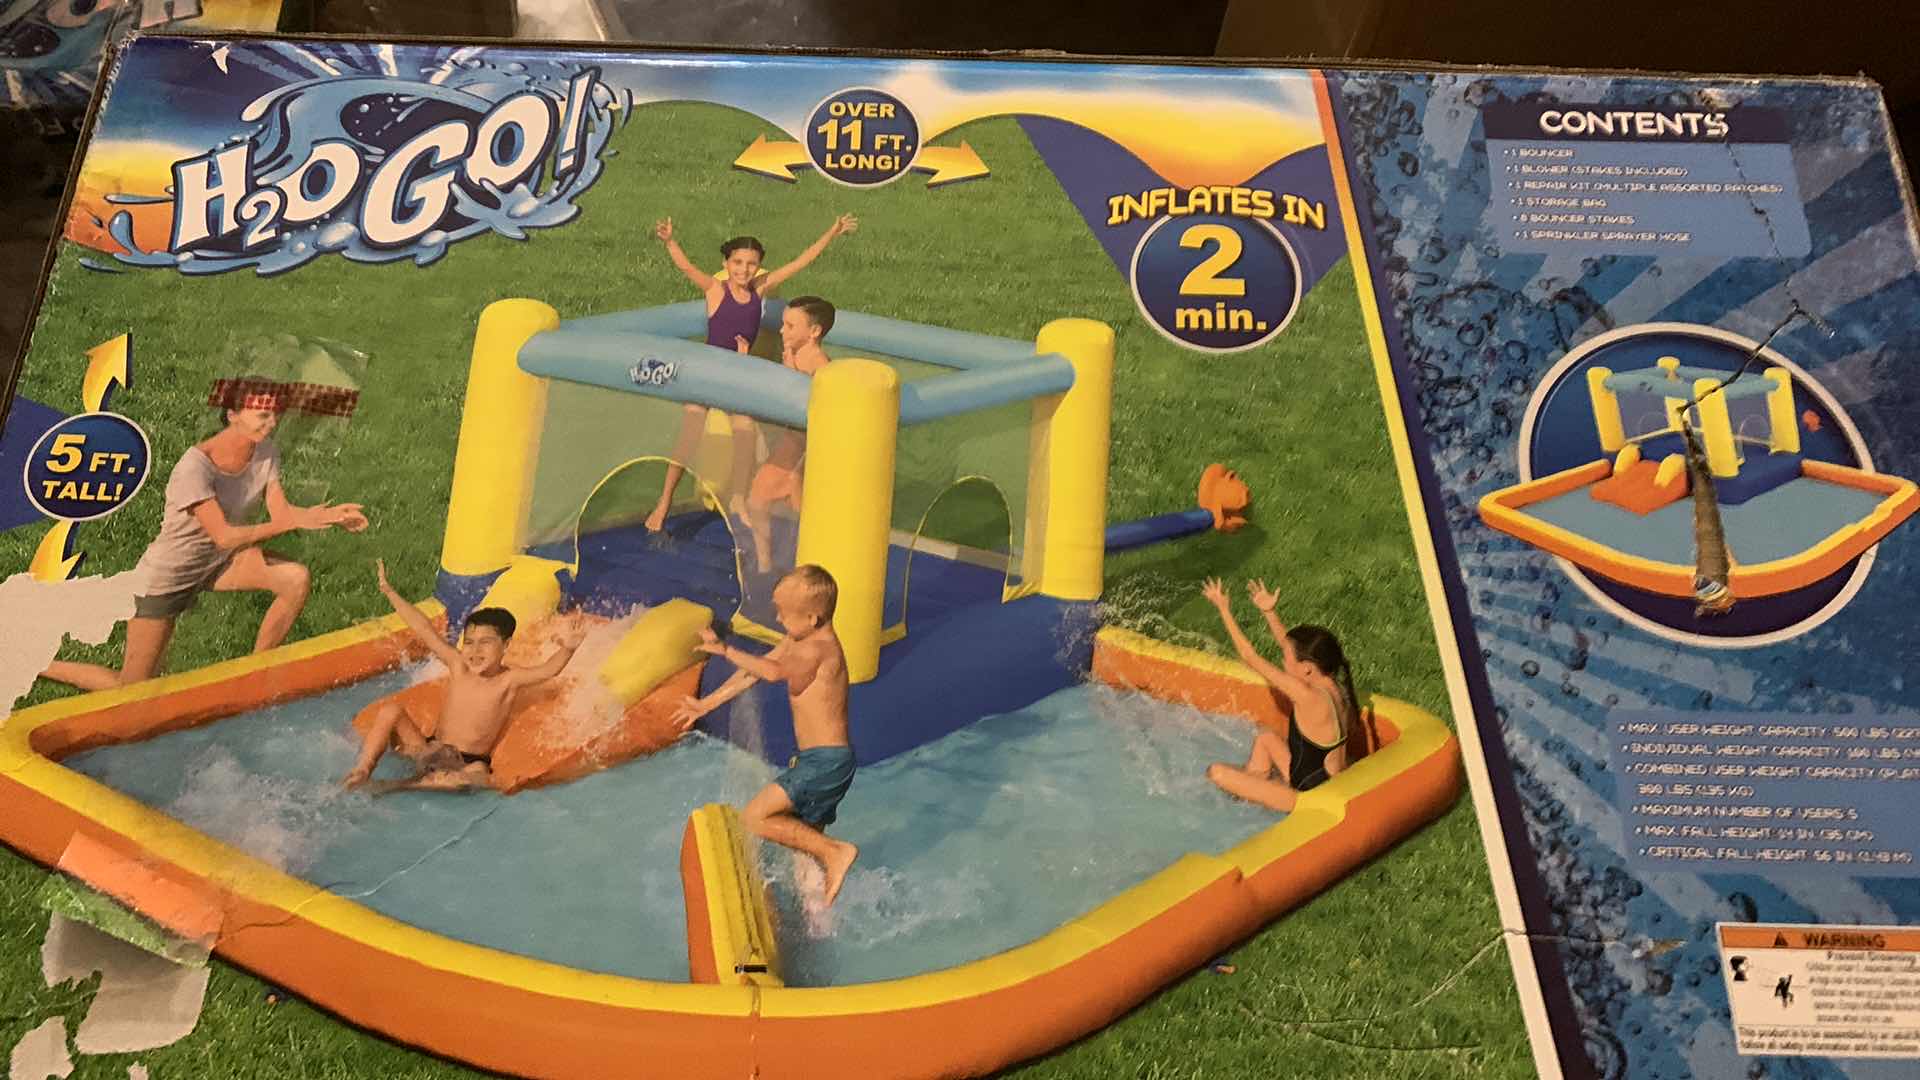 Photo 2 of H2GO BESTWAY BEACH BOUNCE WATER PARK, POOL AND PLAY OVER 11 FT LONG, INFLATES IN 2 MIN